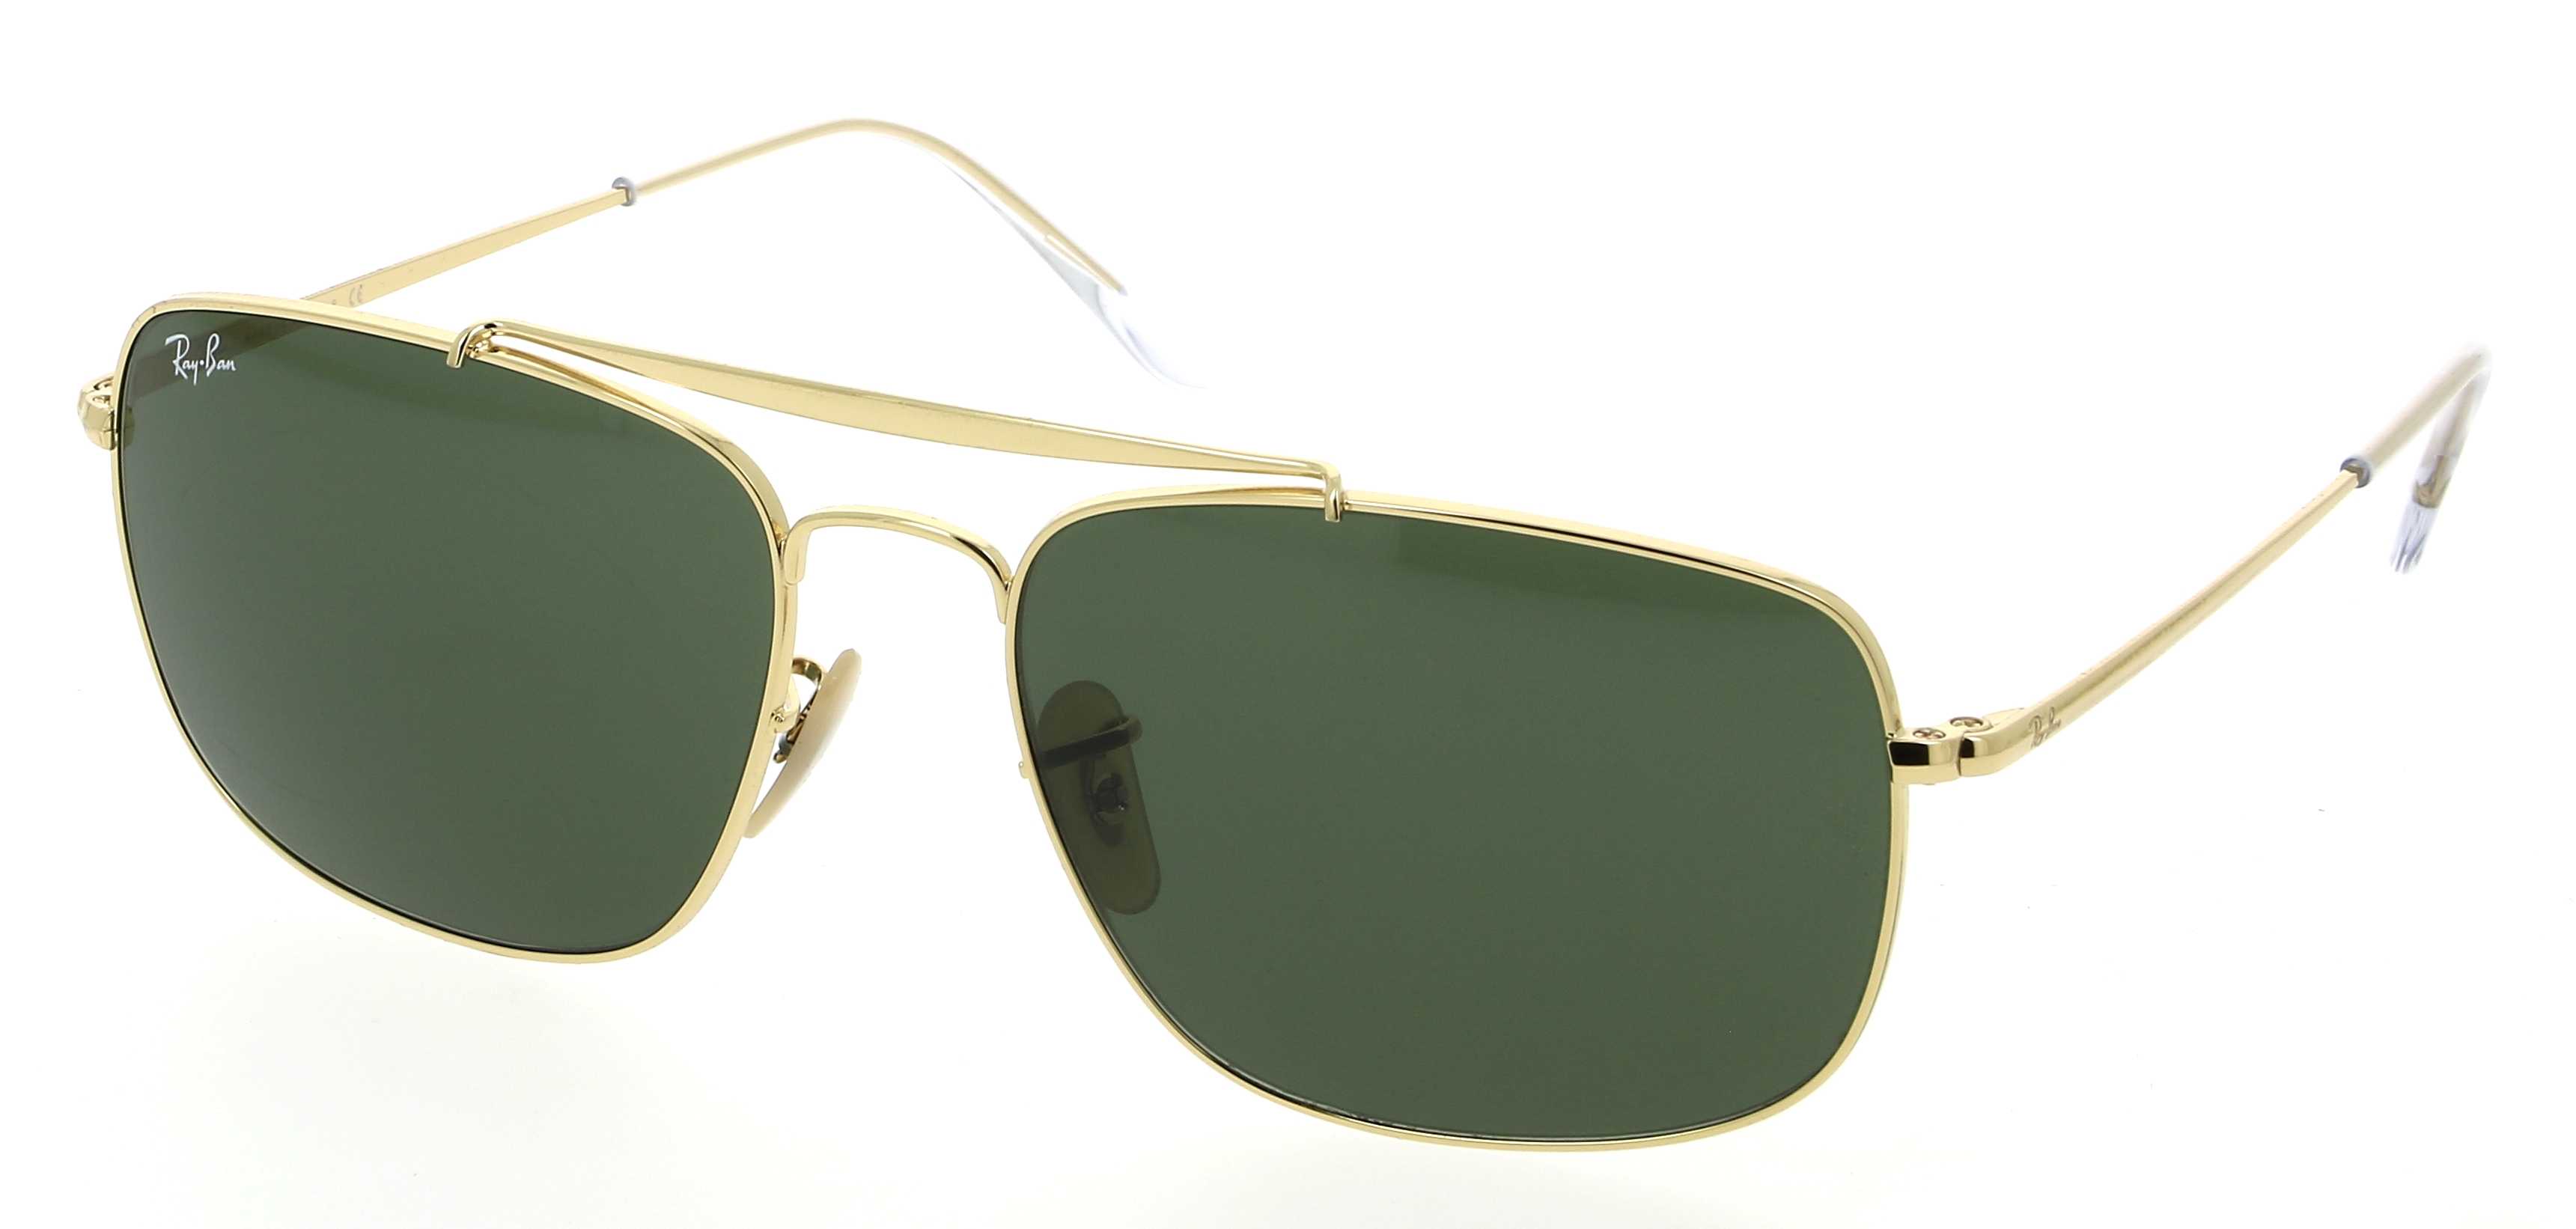 Sunglasses RAY-BAN RB 3560 001 The Colonel 61/17 Man Doré rectangle frames  Full Frame Glasses Vintage 61mmx17mm 128$CA